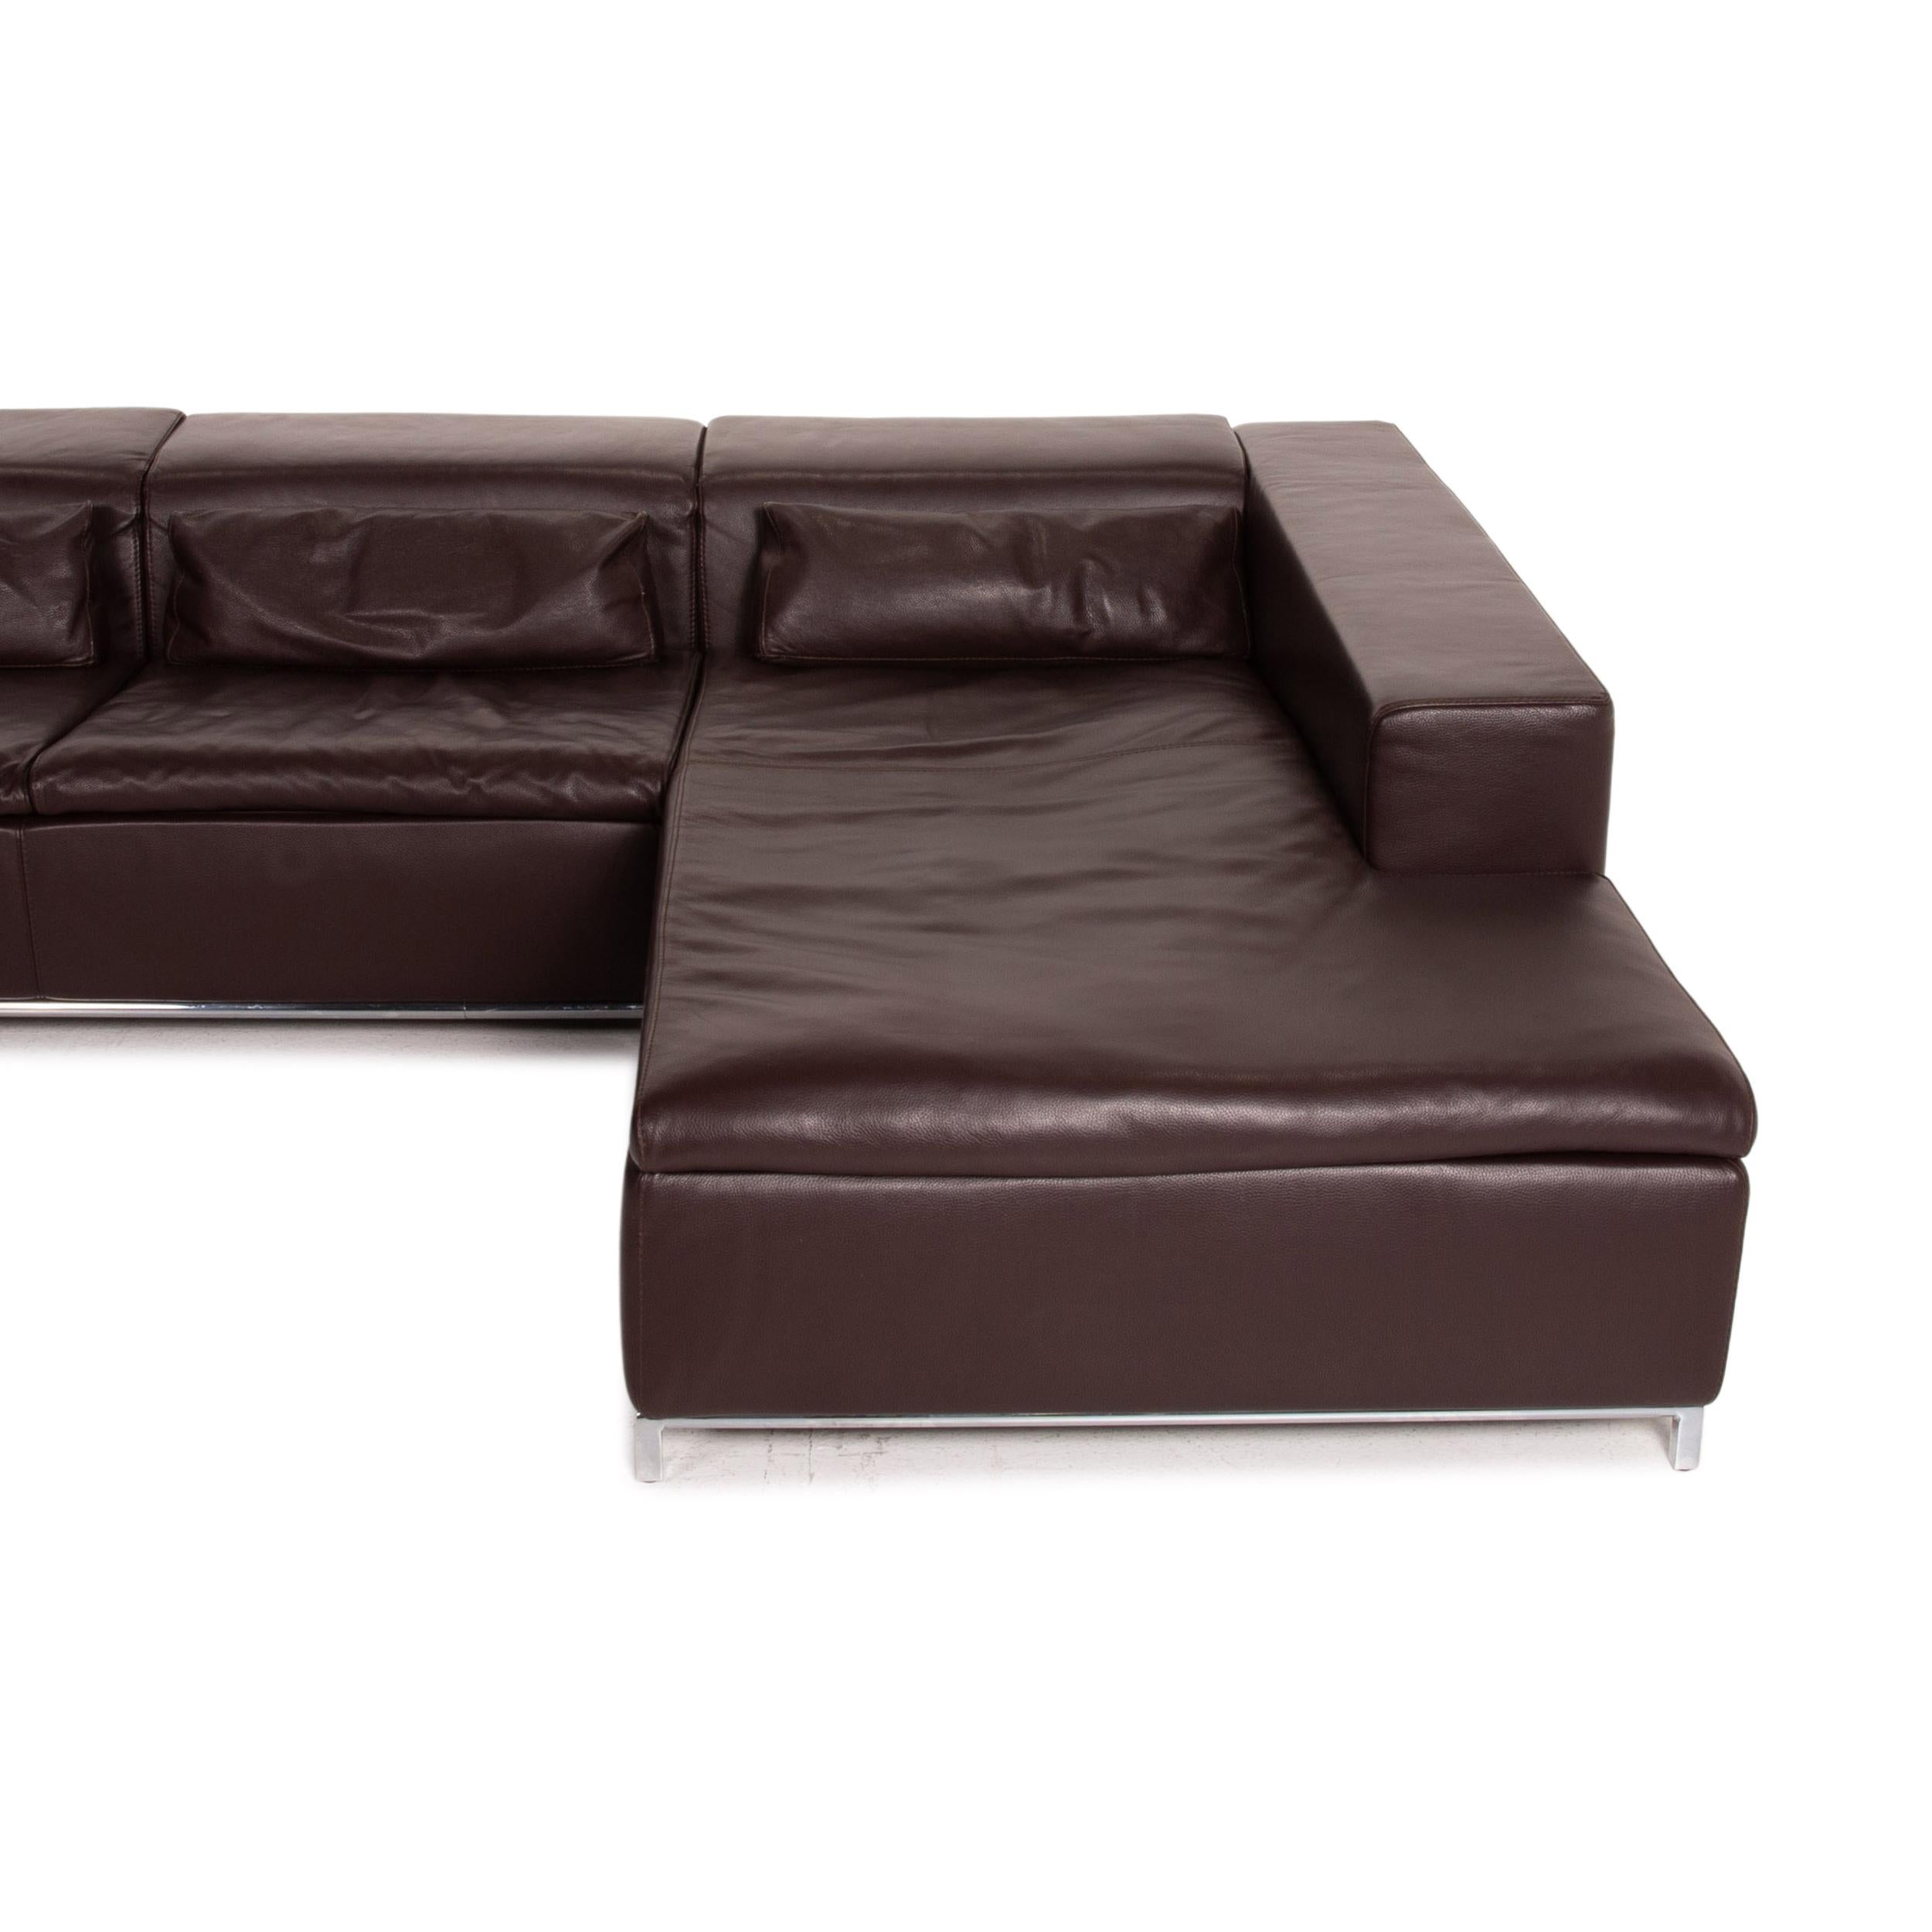 Who's Perfect Leather Corner Sofa Brown Dark Brown Sofa Couch 4